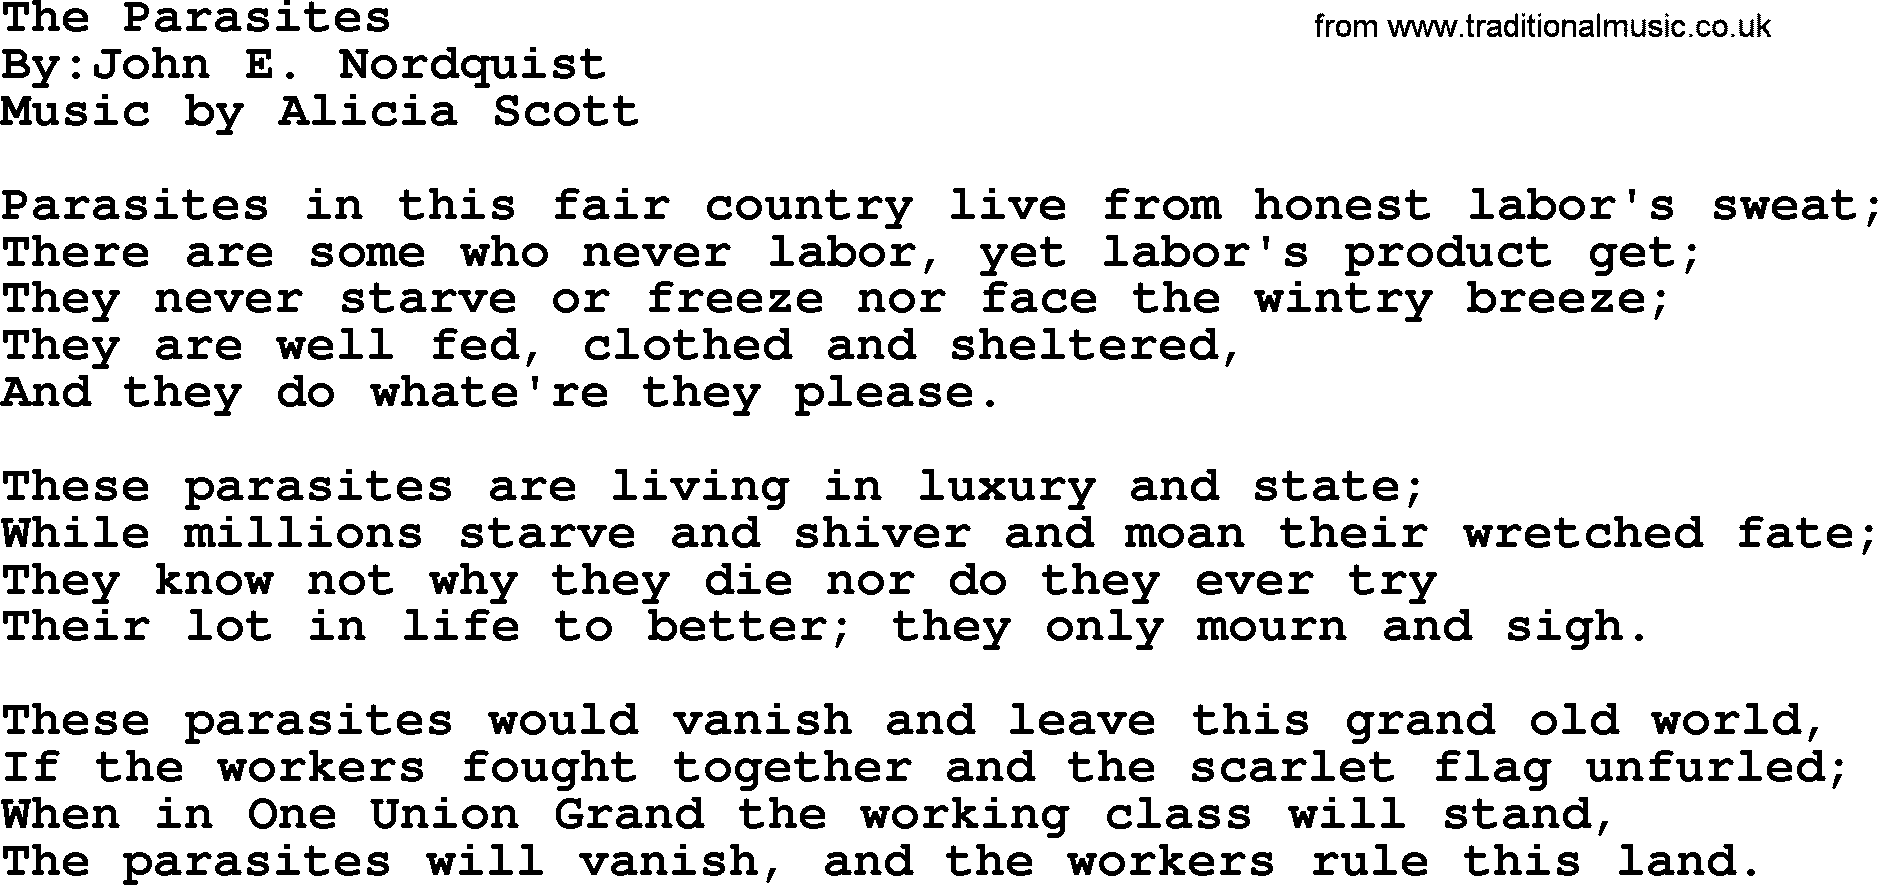 Political, Solidarity, Workers or Union song: The Parasites, lyrics